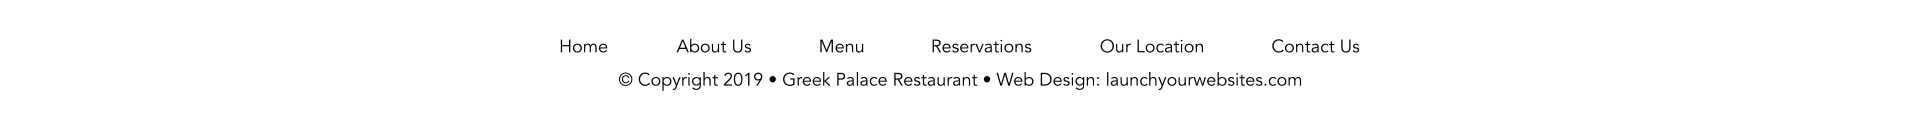 Home About Us Menu Reservations Our Location Contact Us © Copyright 2019 • Greek Palace Restaurant • Web Design: launchyourwebsites.com